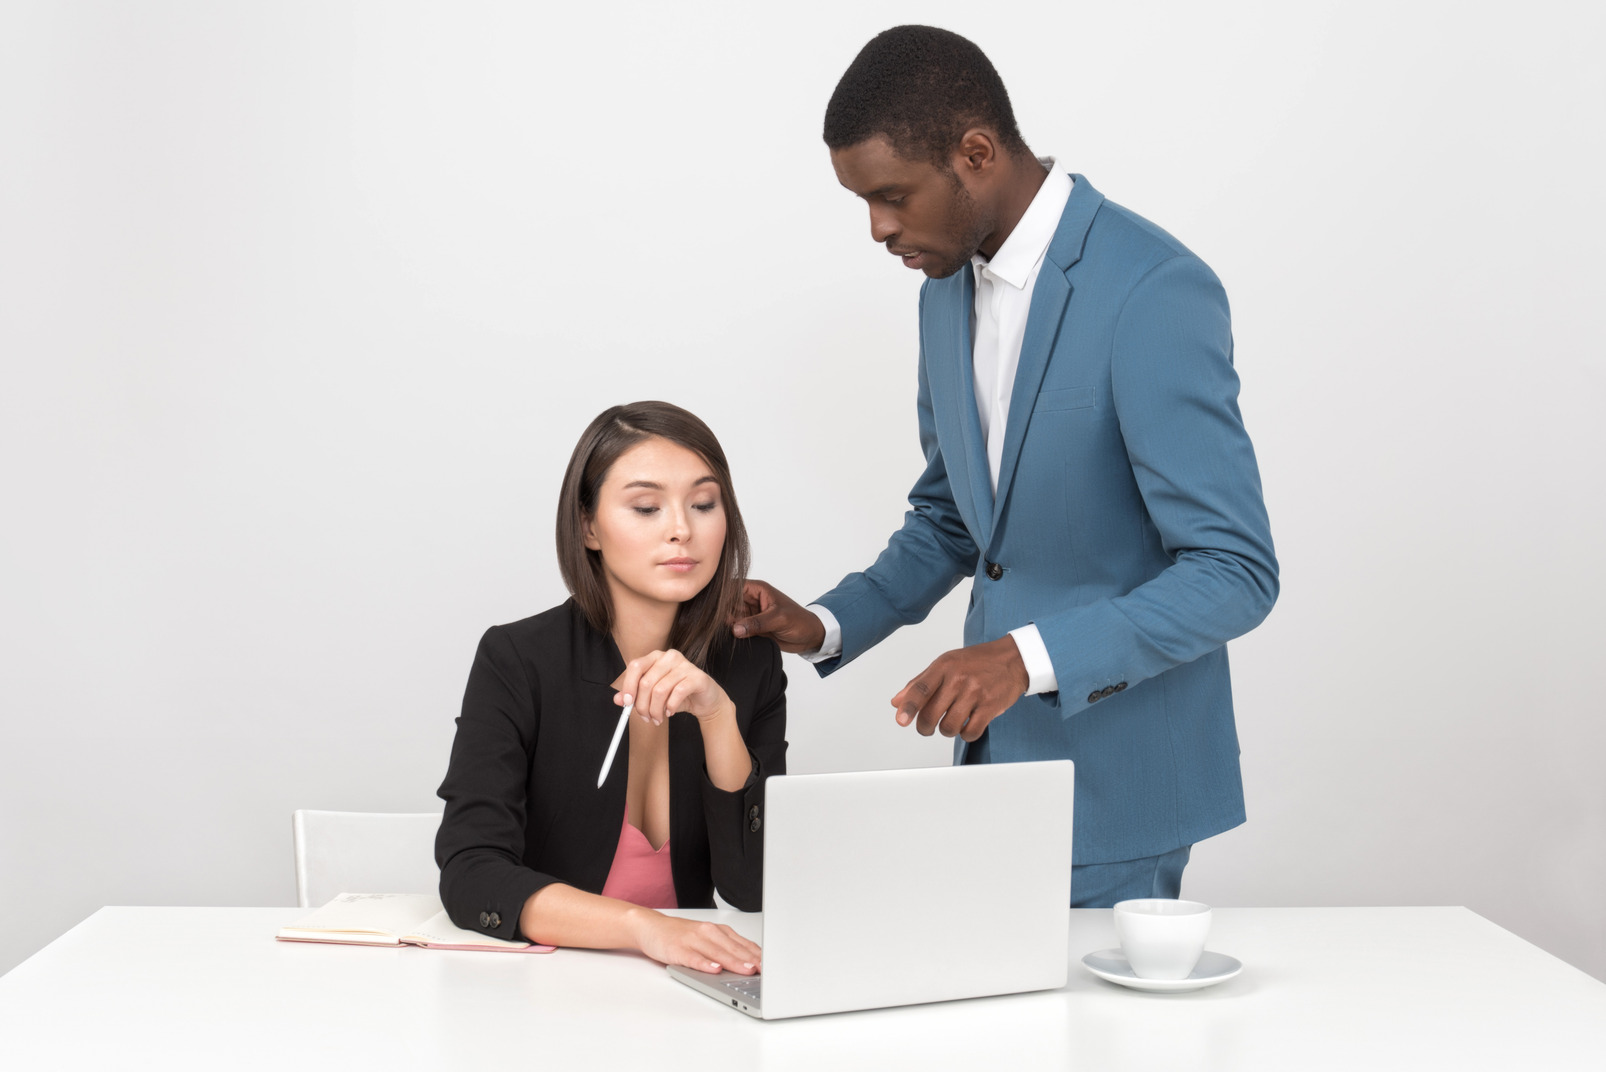 Man explaining some work stuff to female colleague